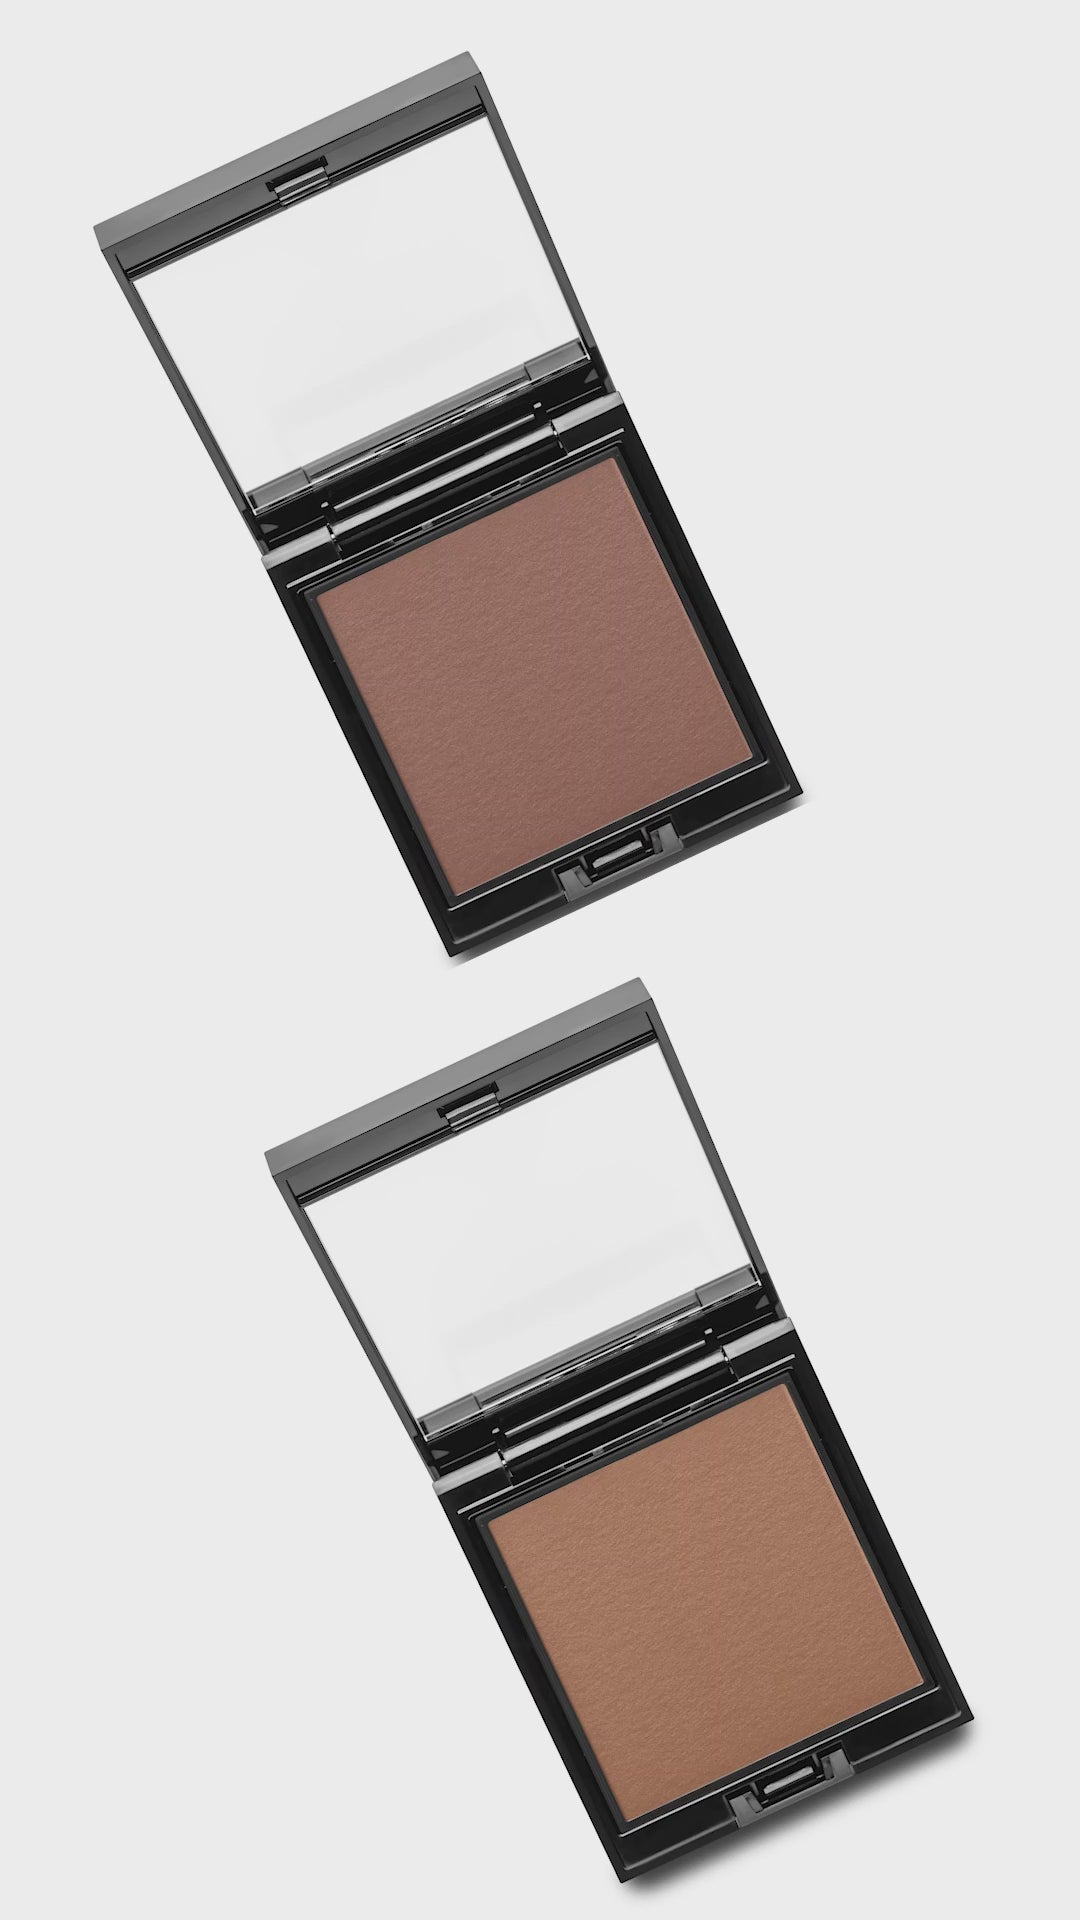 SOLEIL CLAIR - WARM UNDERTONE - bronzer for medium to deep complexions and warm undertones in a satin finish on model video